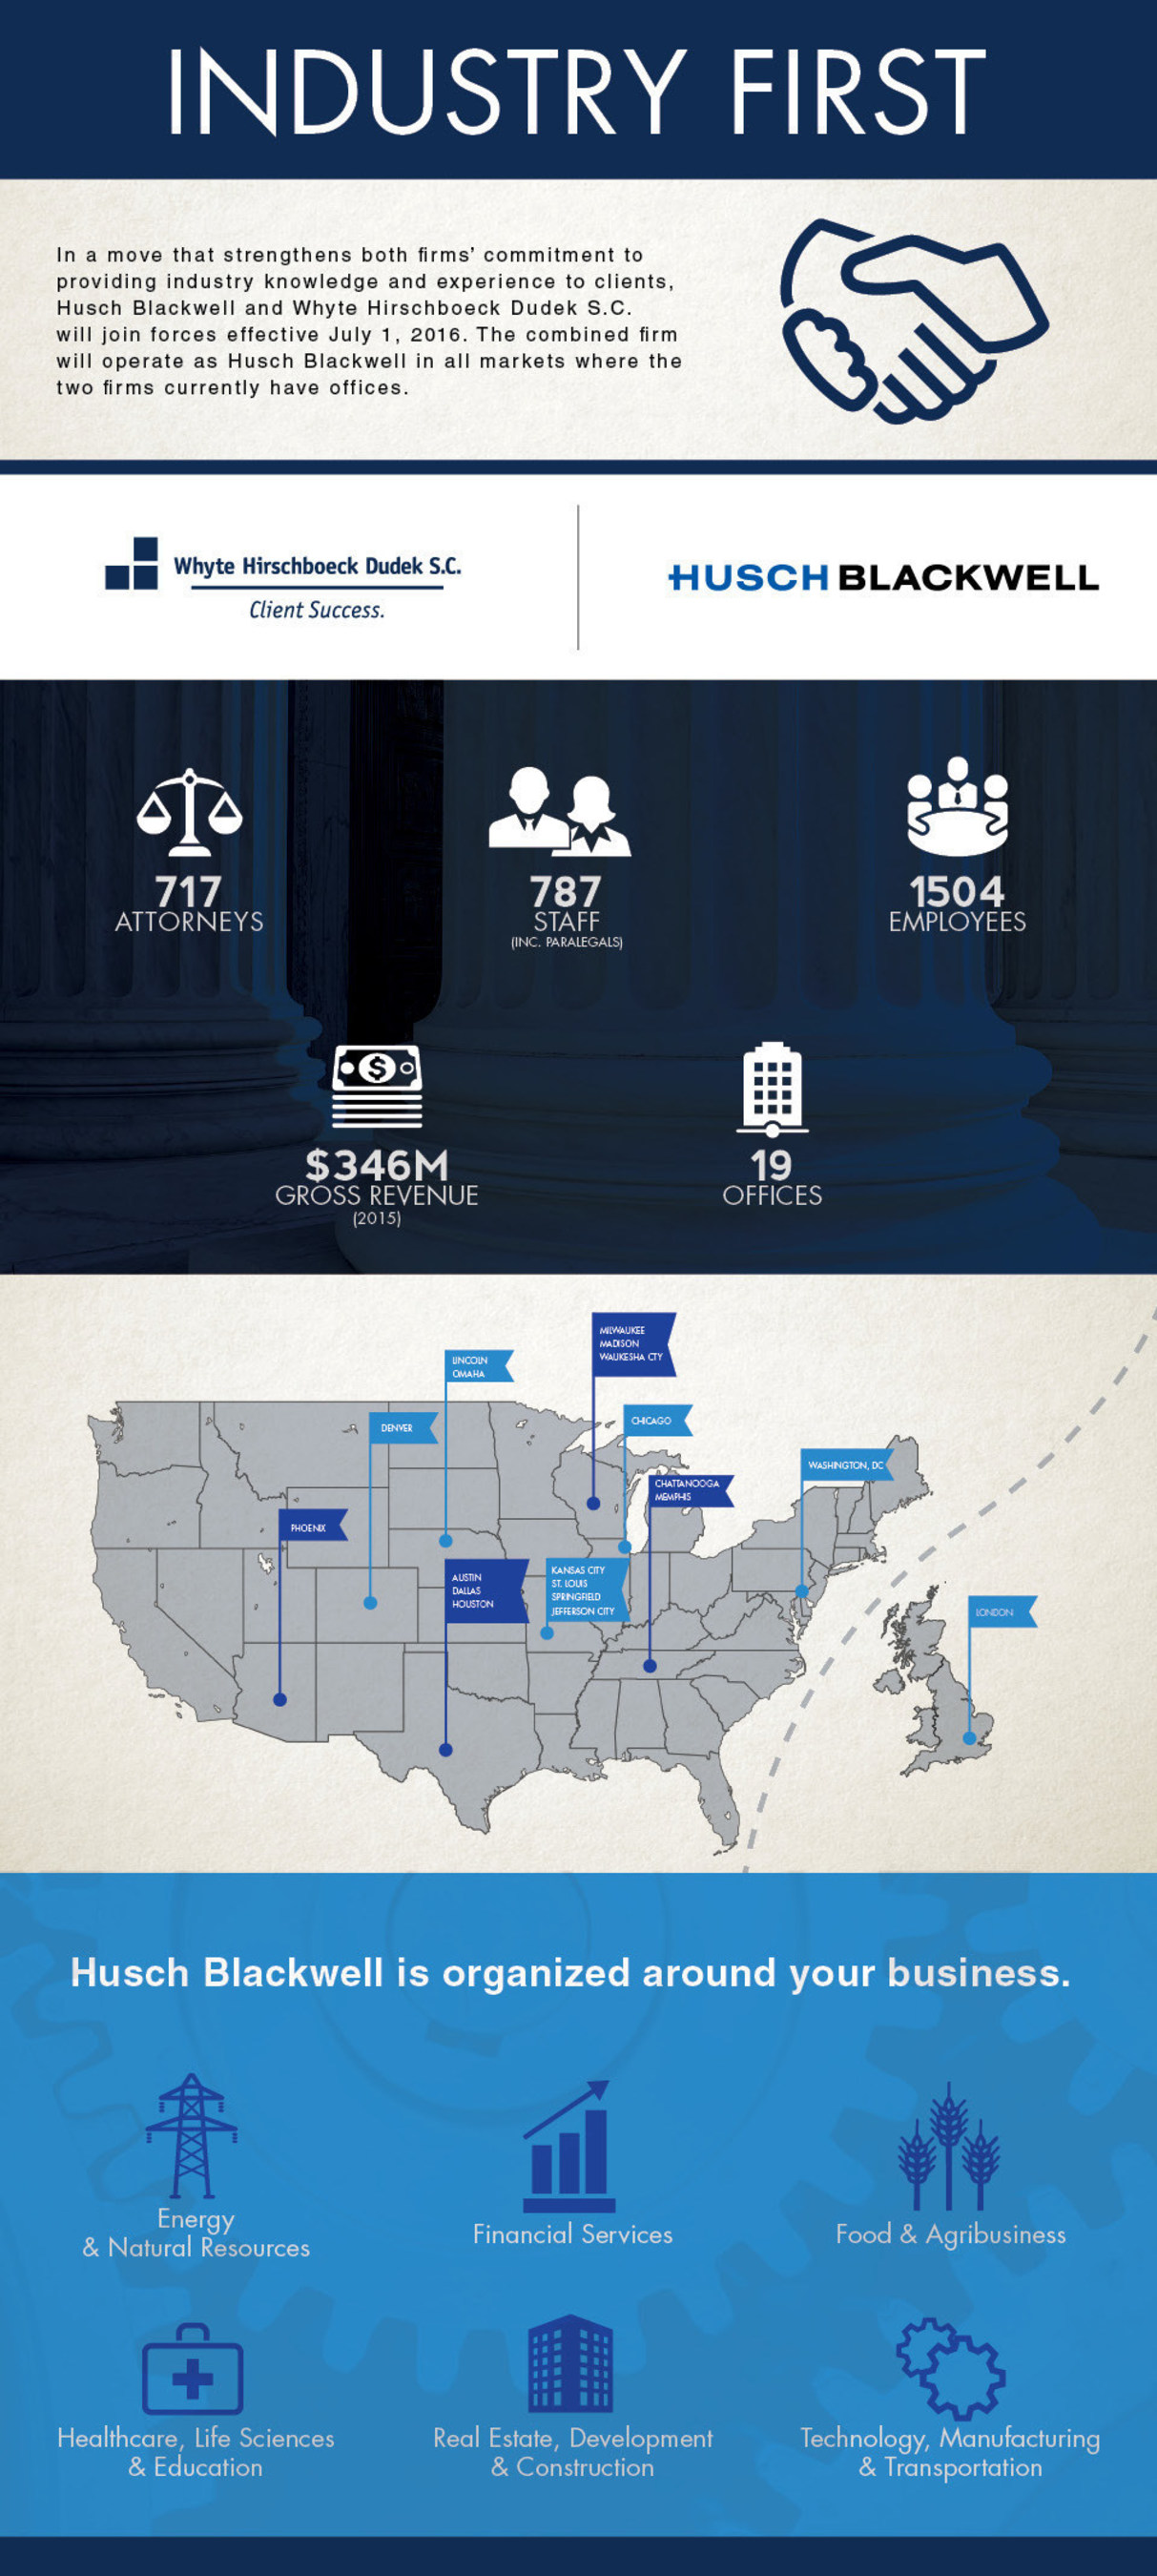 With the addition of WHD's offices, the combined Husch Blackwell firm will have more than 700 attorneys and offices in 19 cities, and combined annual revenues of approximately $346 million in 2015.